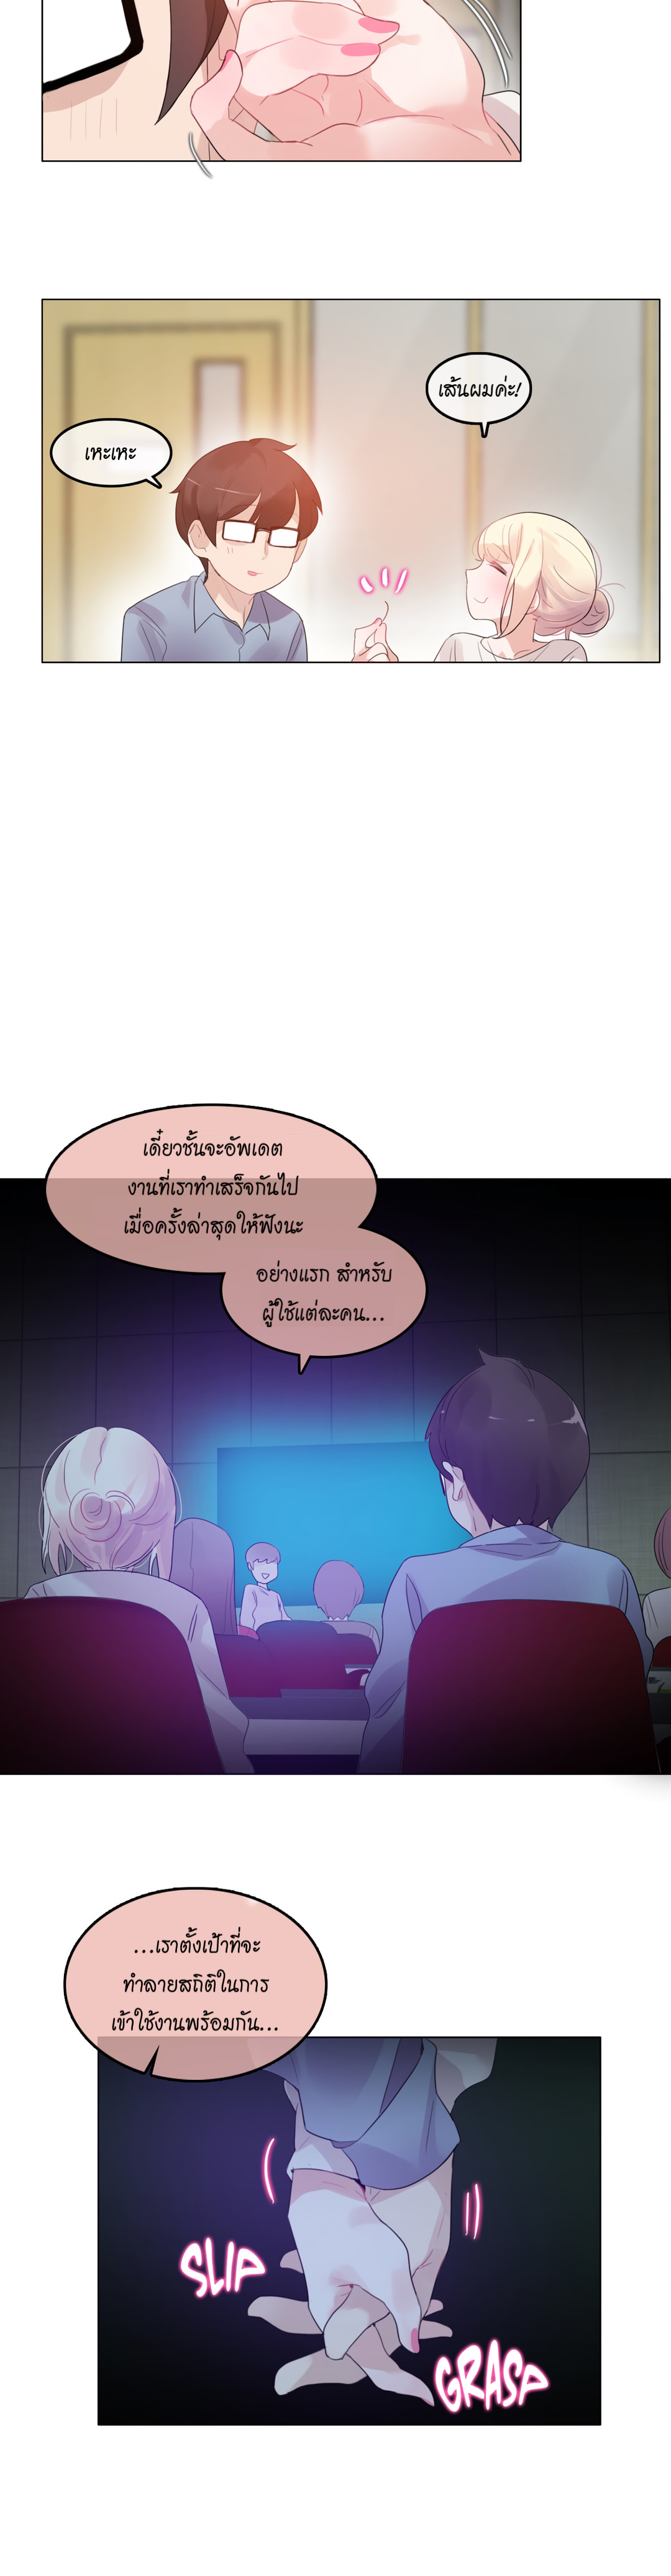 A Pervert’s Daily Life56 (6)